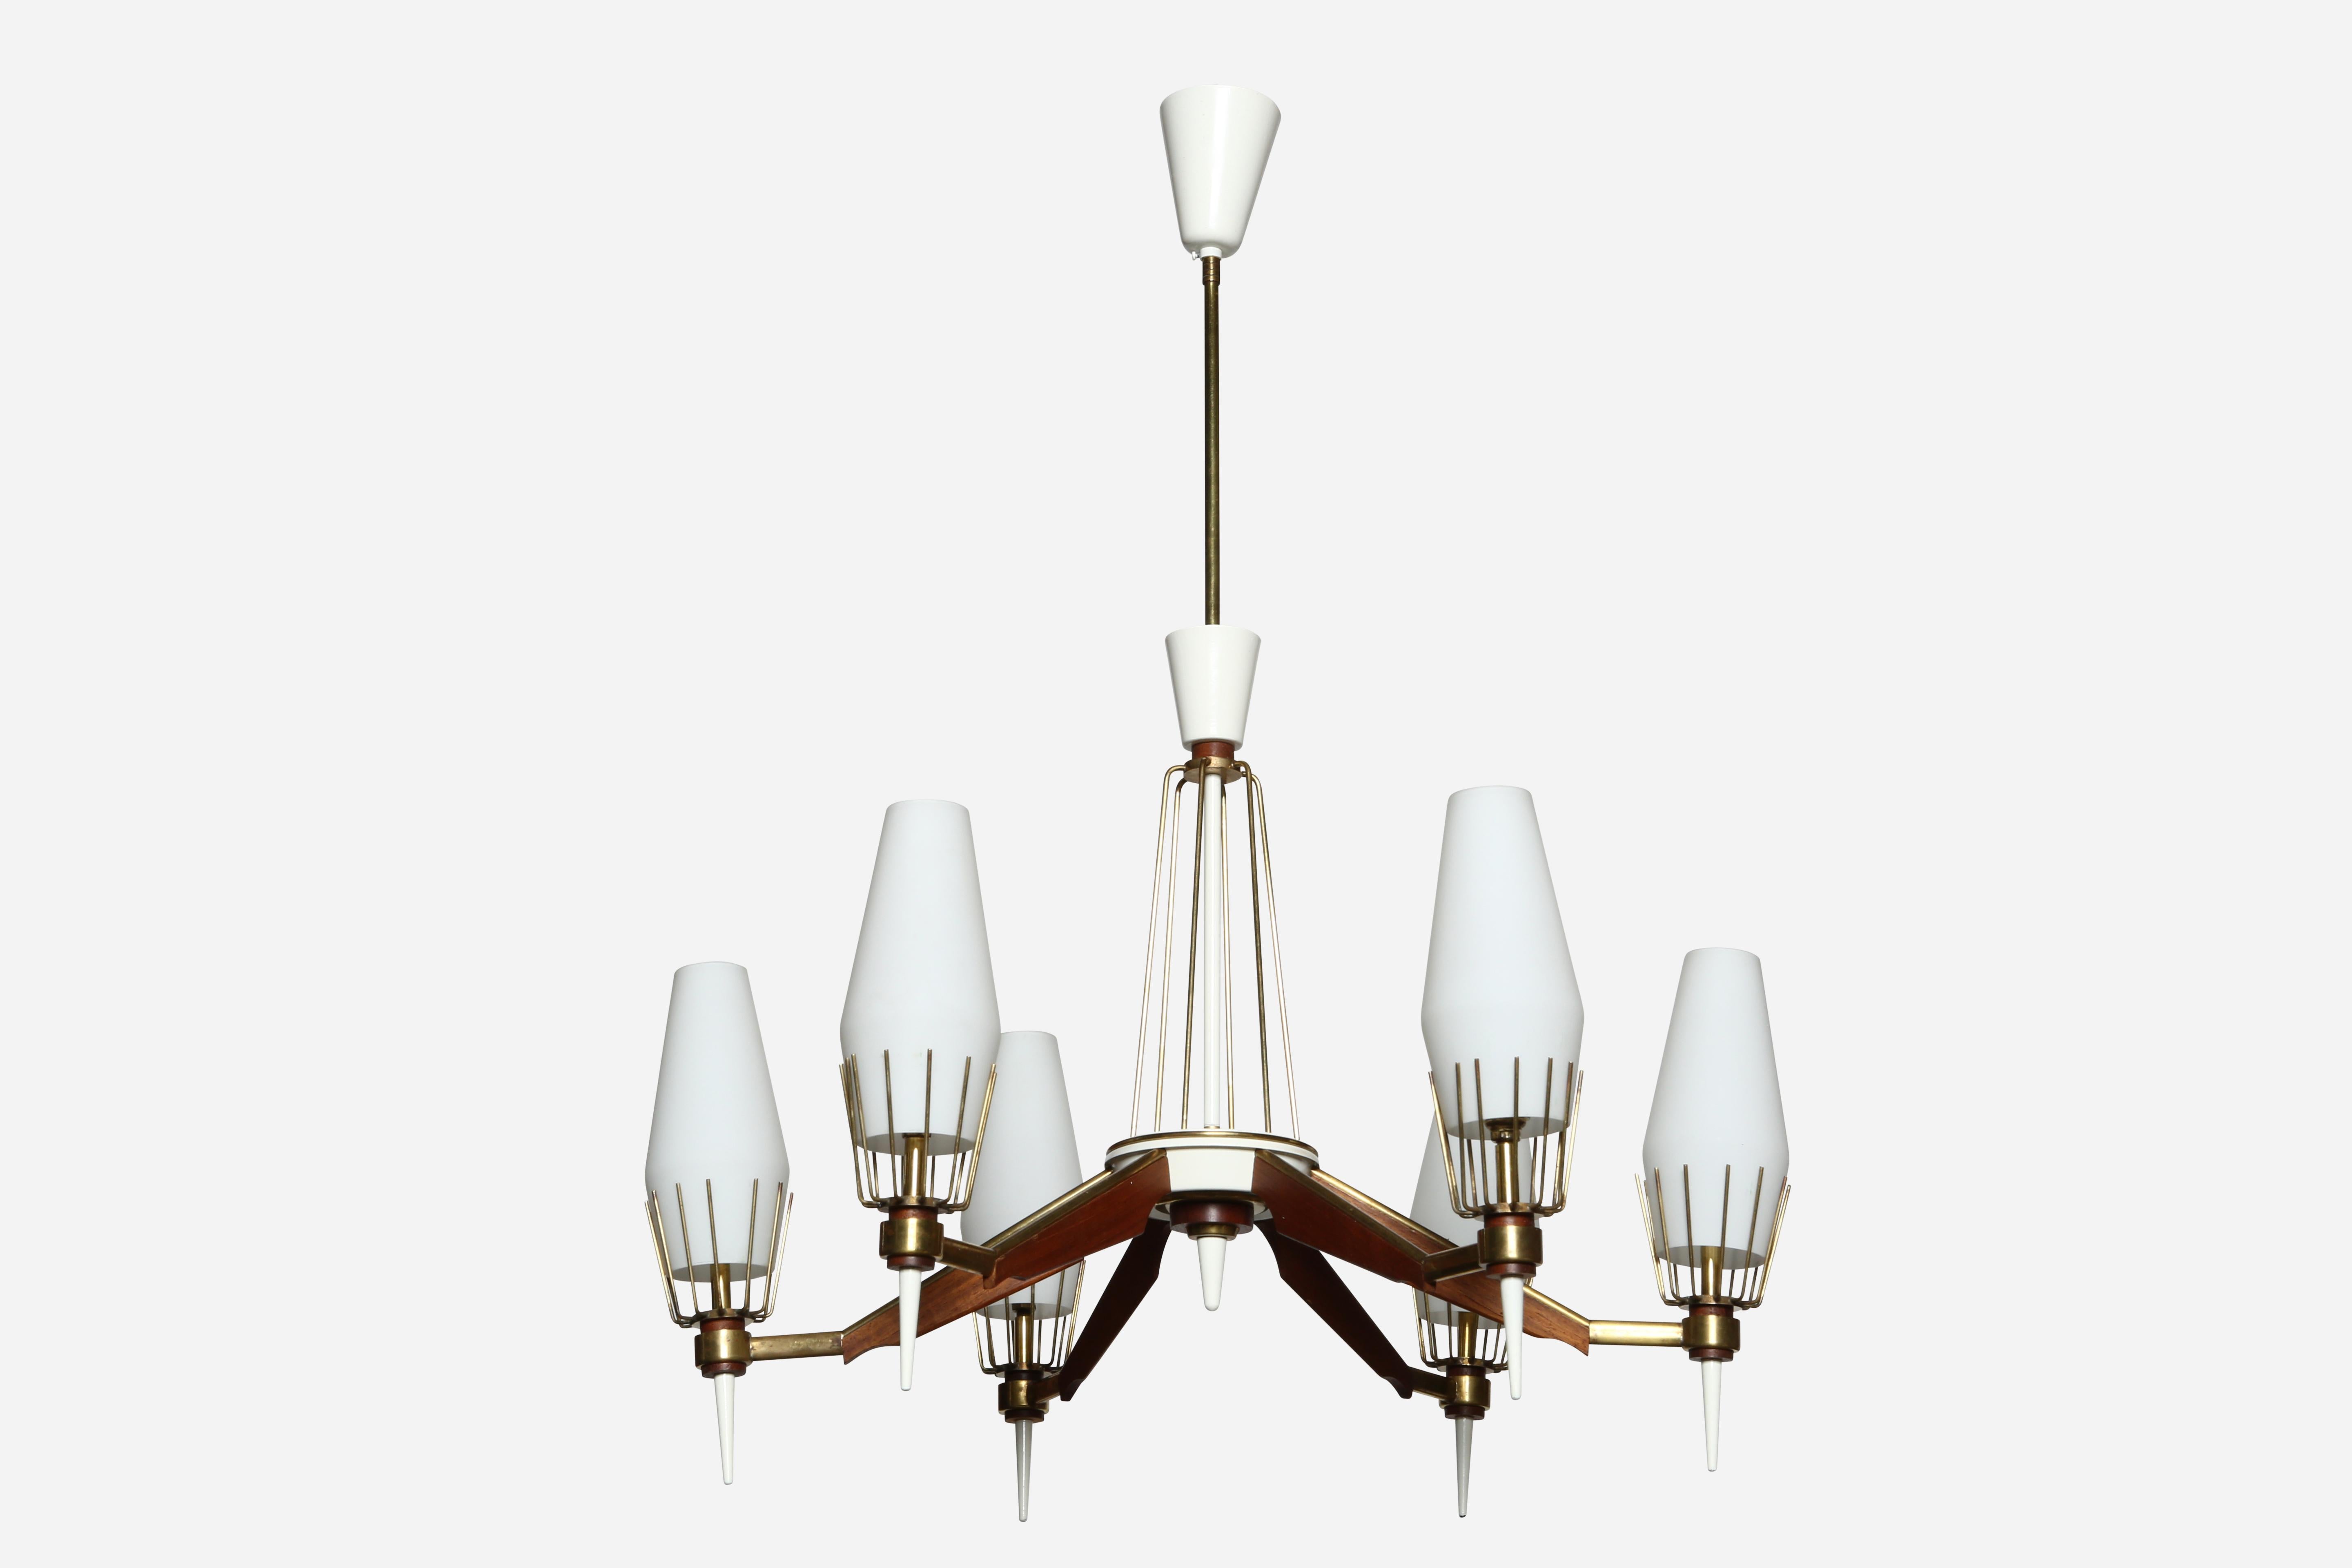 Stilnovo style chandelier
Designed and made in Italy 1960s
Opaline glass, brass, wood.
6 candelabra sockets.
Complimentary US rewiring upon request.

We take pride in bringing vintage fixtures to their full glory again.
At Illustris Lighting our